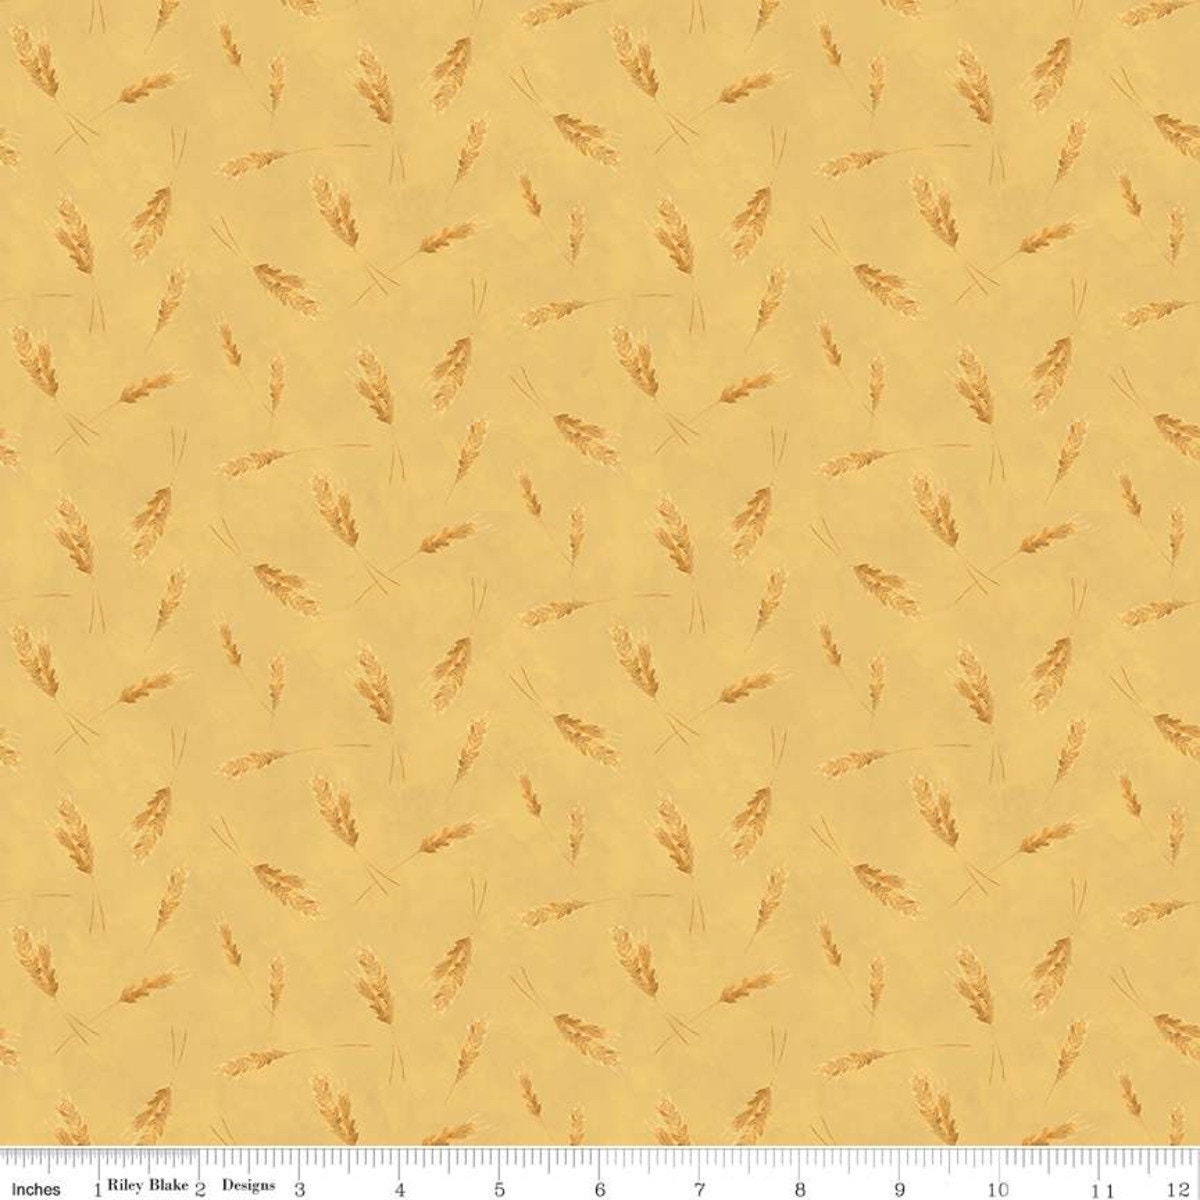 SALE Buttermilk Homestead Panel Two P11662 by Riley Blake Designs - Printed  Appliques - Quilting Cotton Fabric